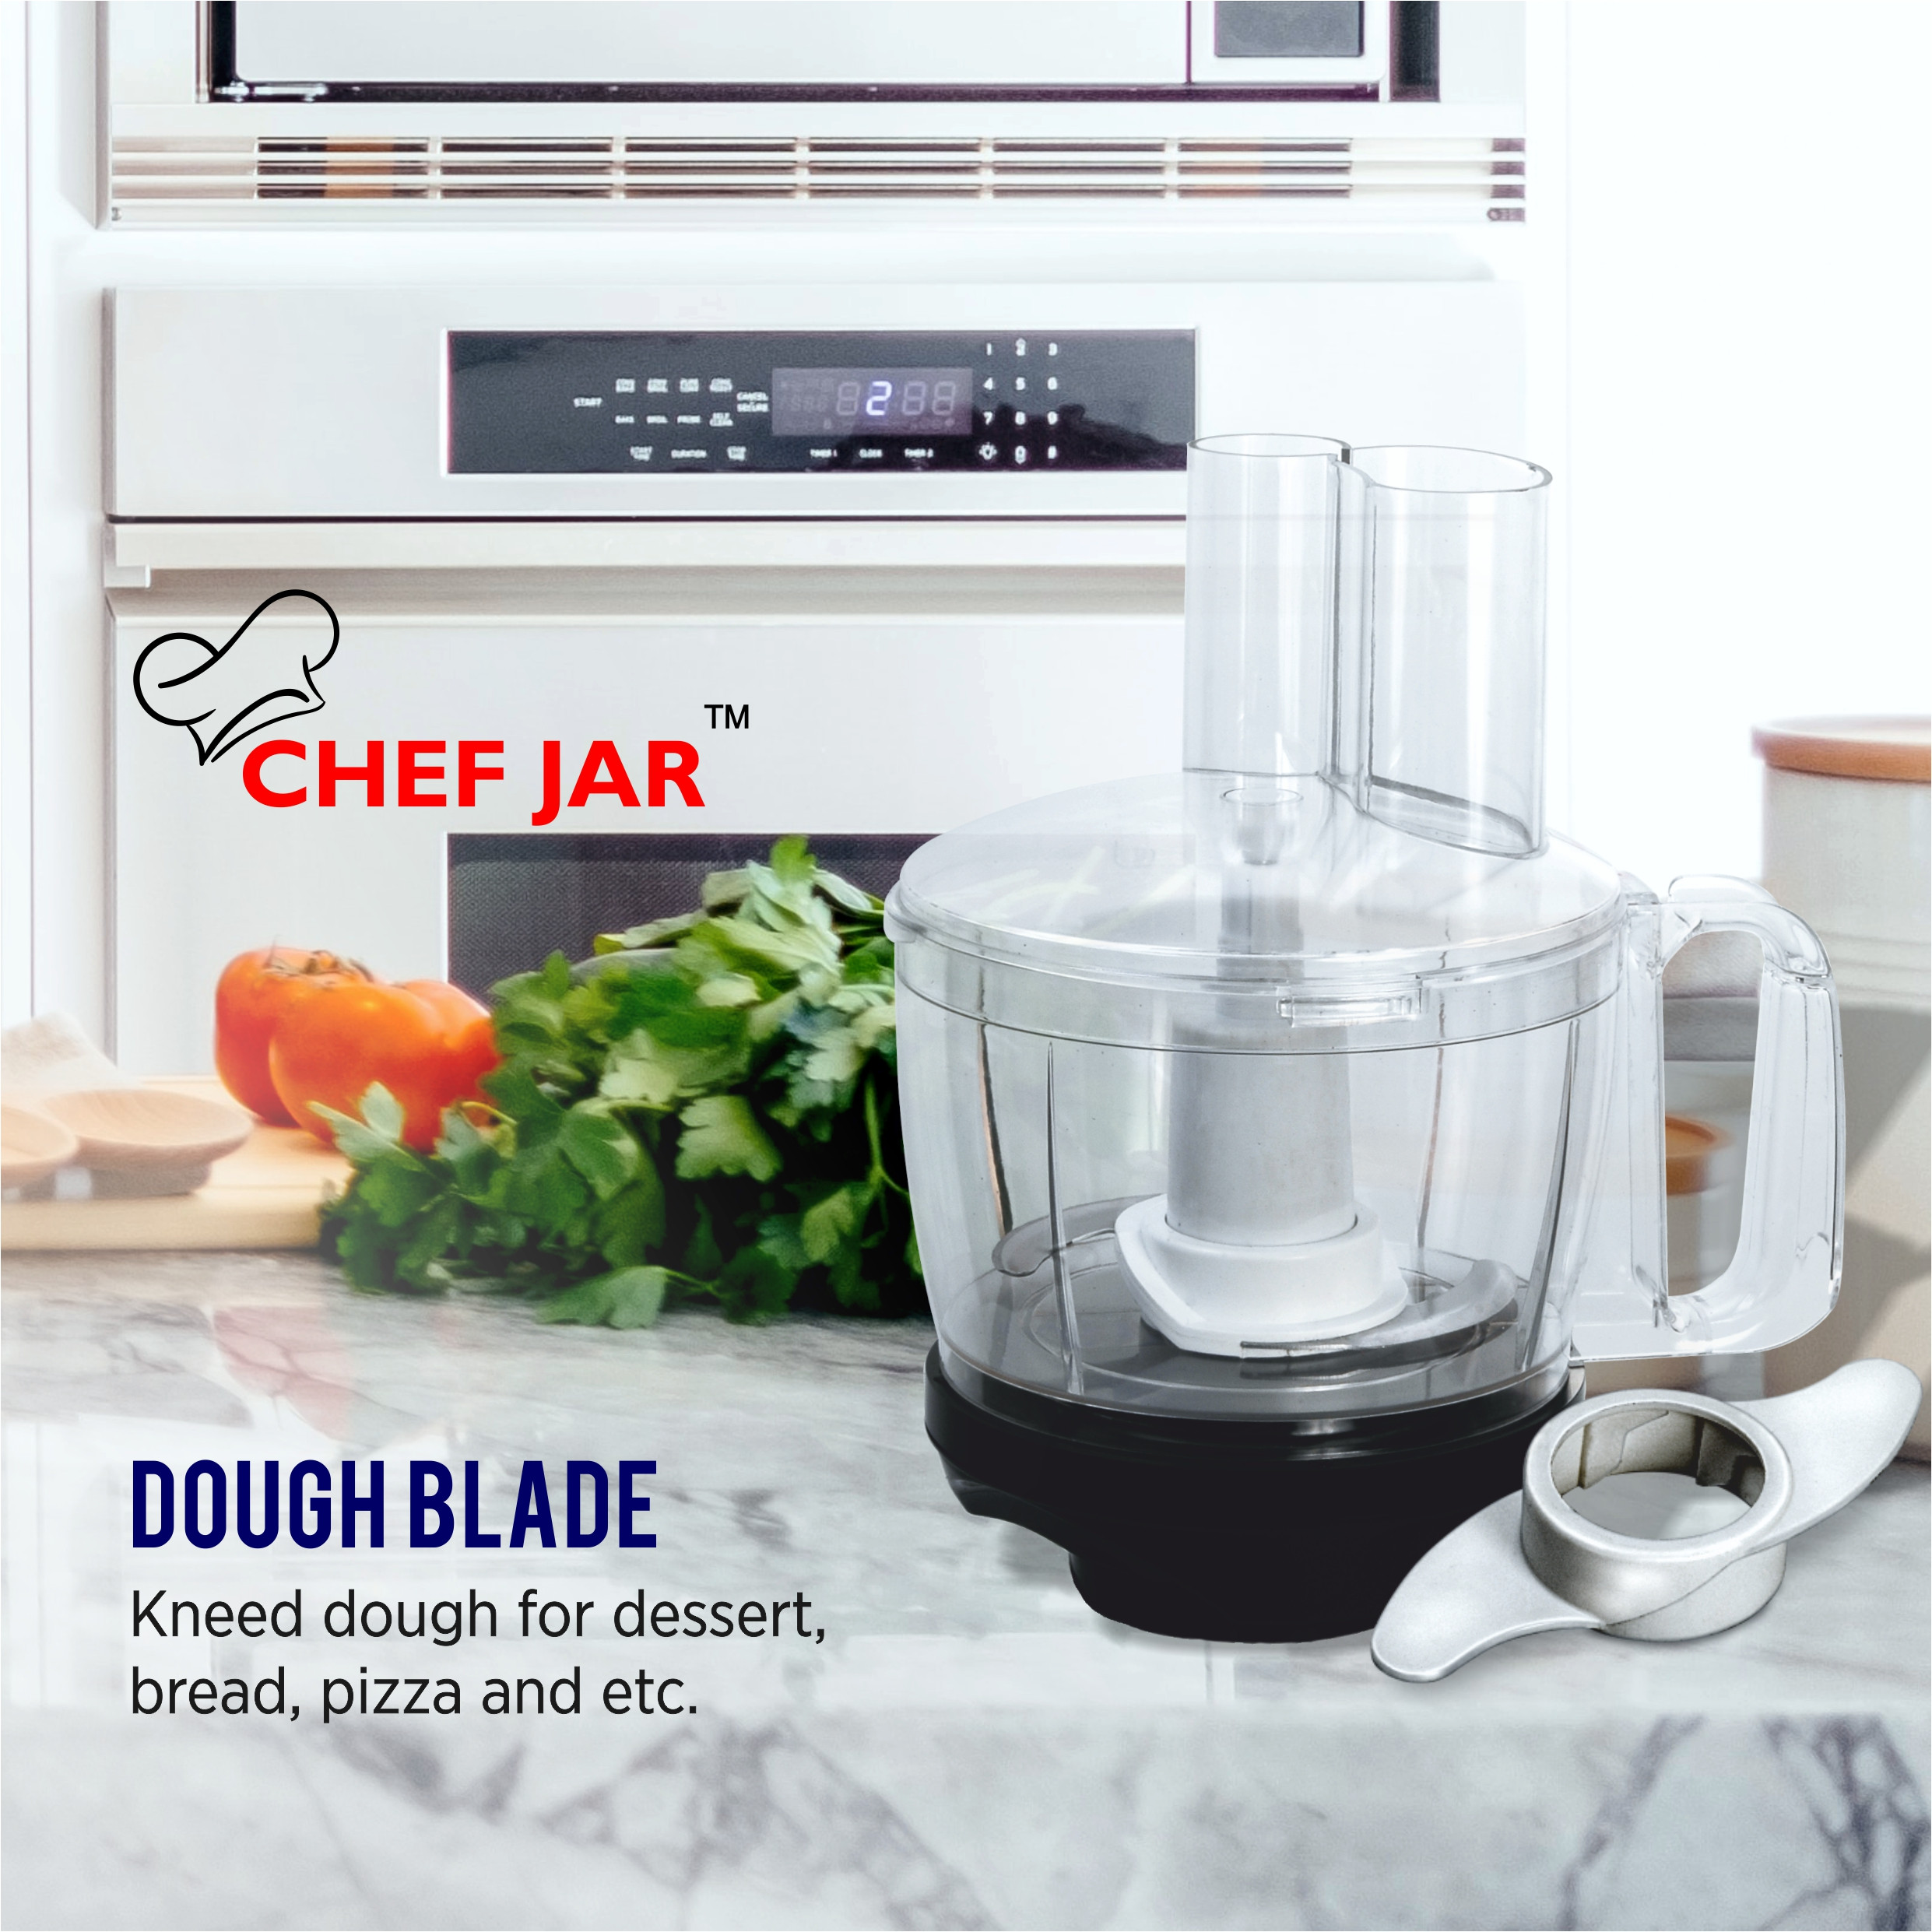 bajaj-classic-pro-600w-indian-mixer-grinder-with-special-chef-jar-stainless-steel-jars-indian-mixer-grinder-spice-coffee-grinder-110v-for-use-in-canada-usa12